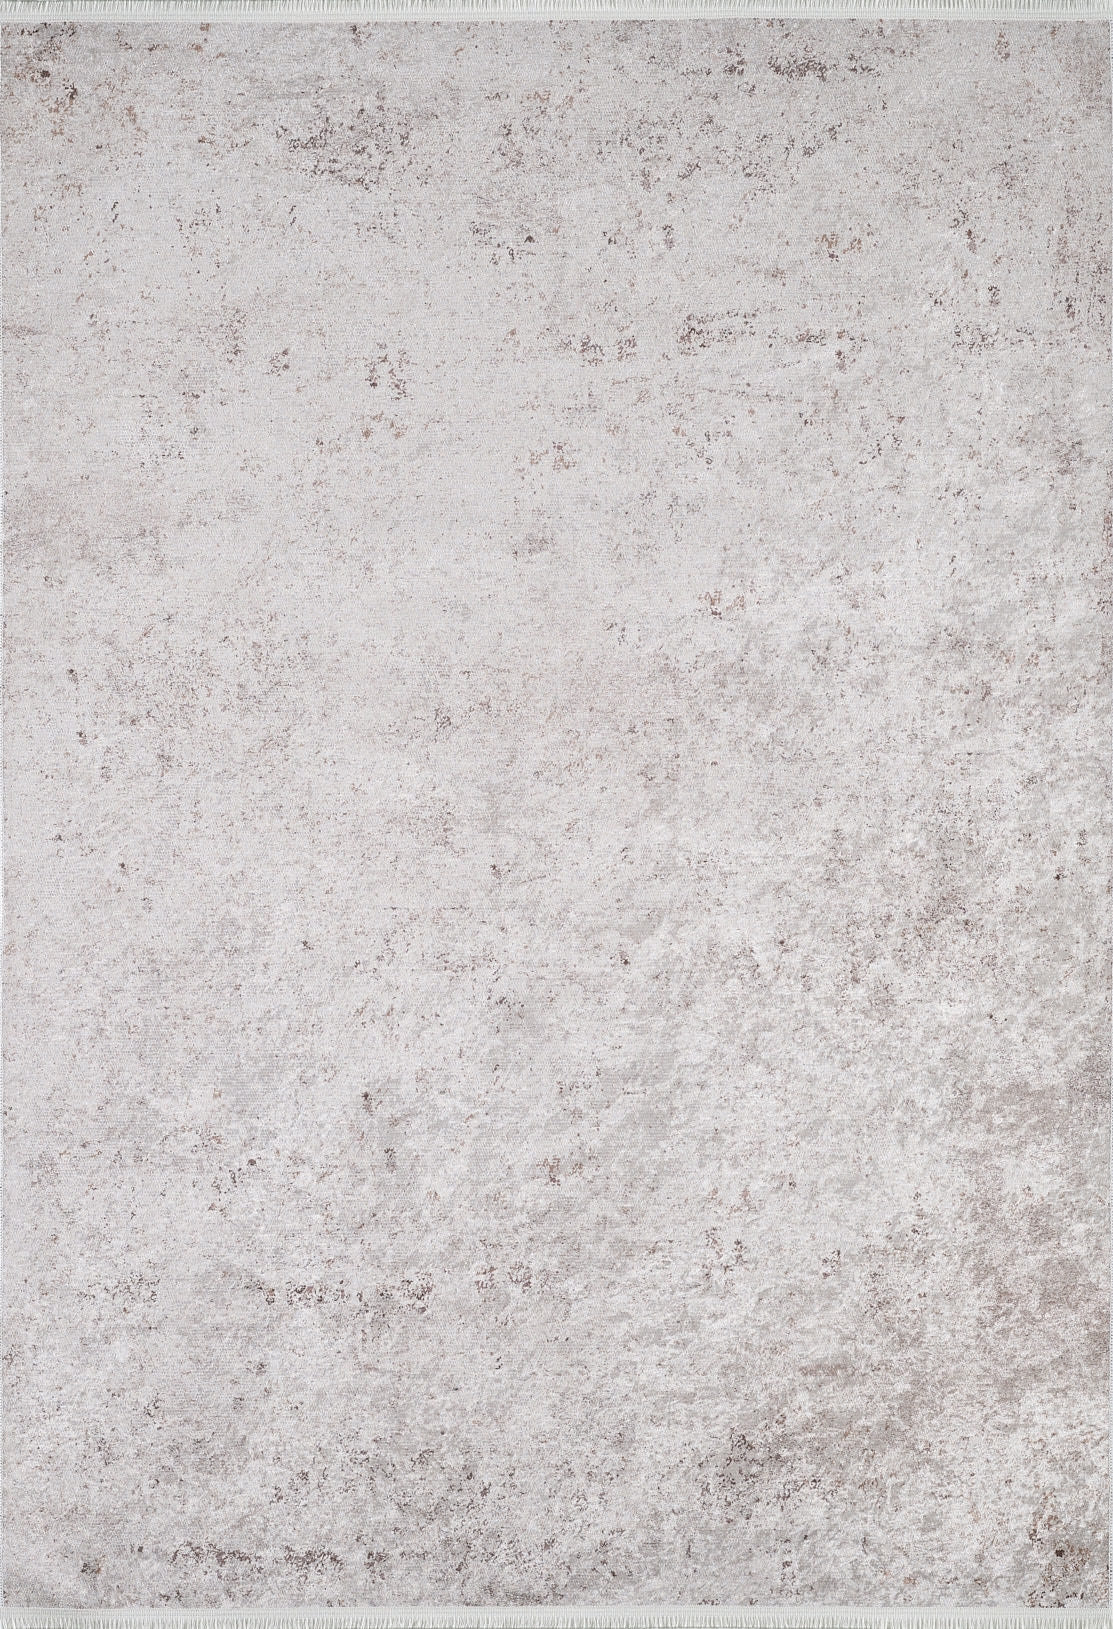 machine-washable-area-rug-Tone-on-Tone-Ombre-Modern-Collection-Gray-Anthracite-JR1736